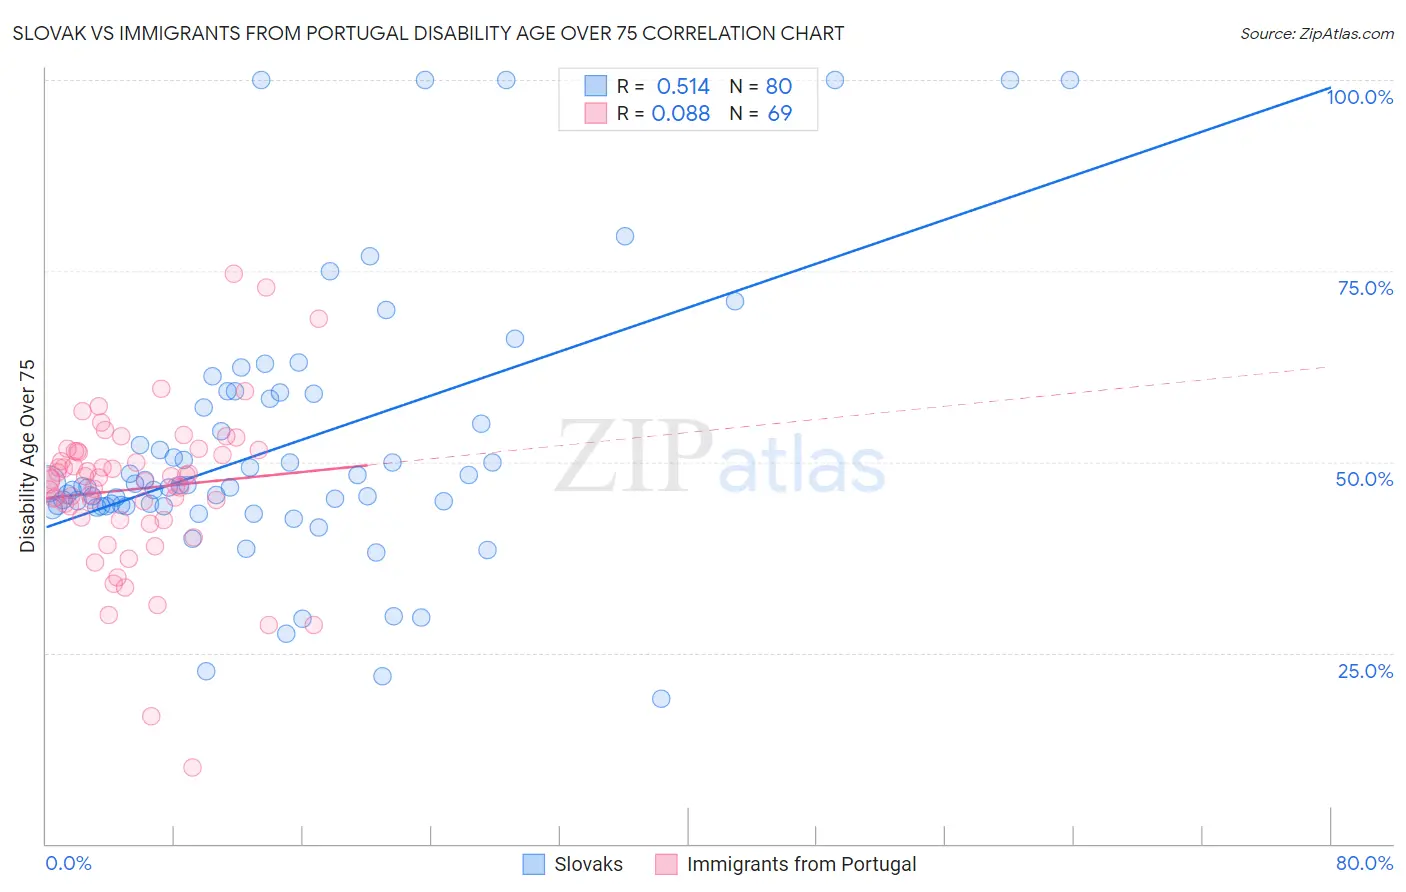 Slovak vs Immigrants from Portugal Disability Age Over 75